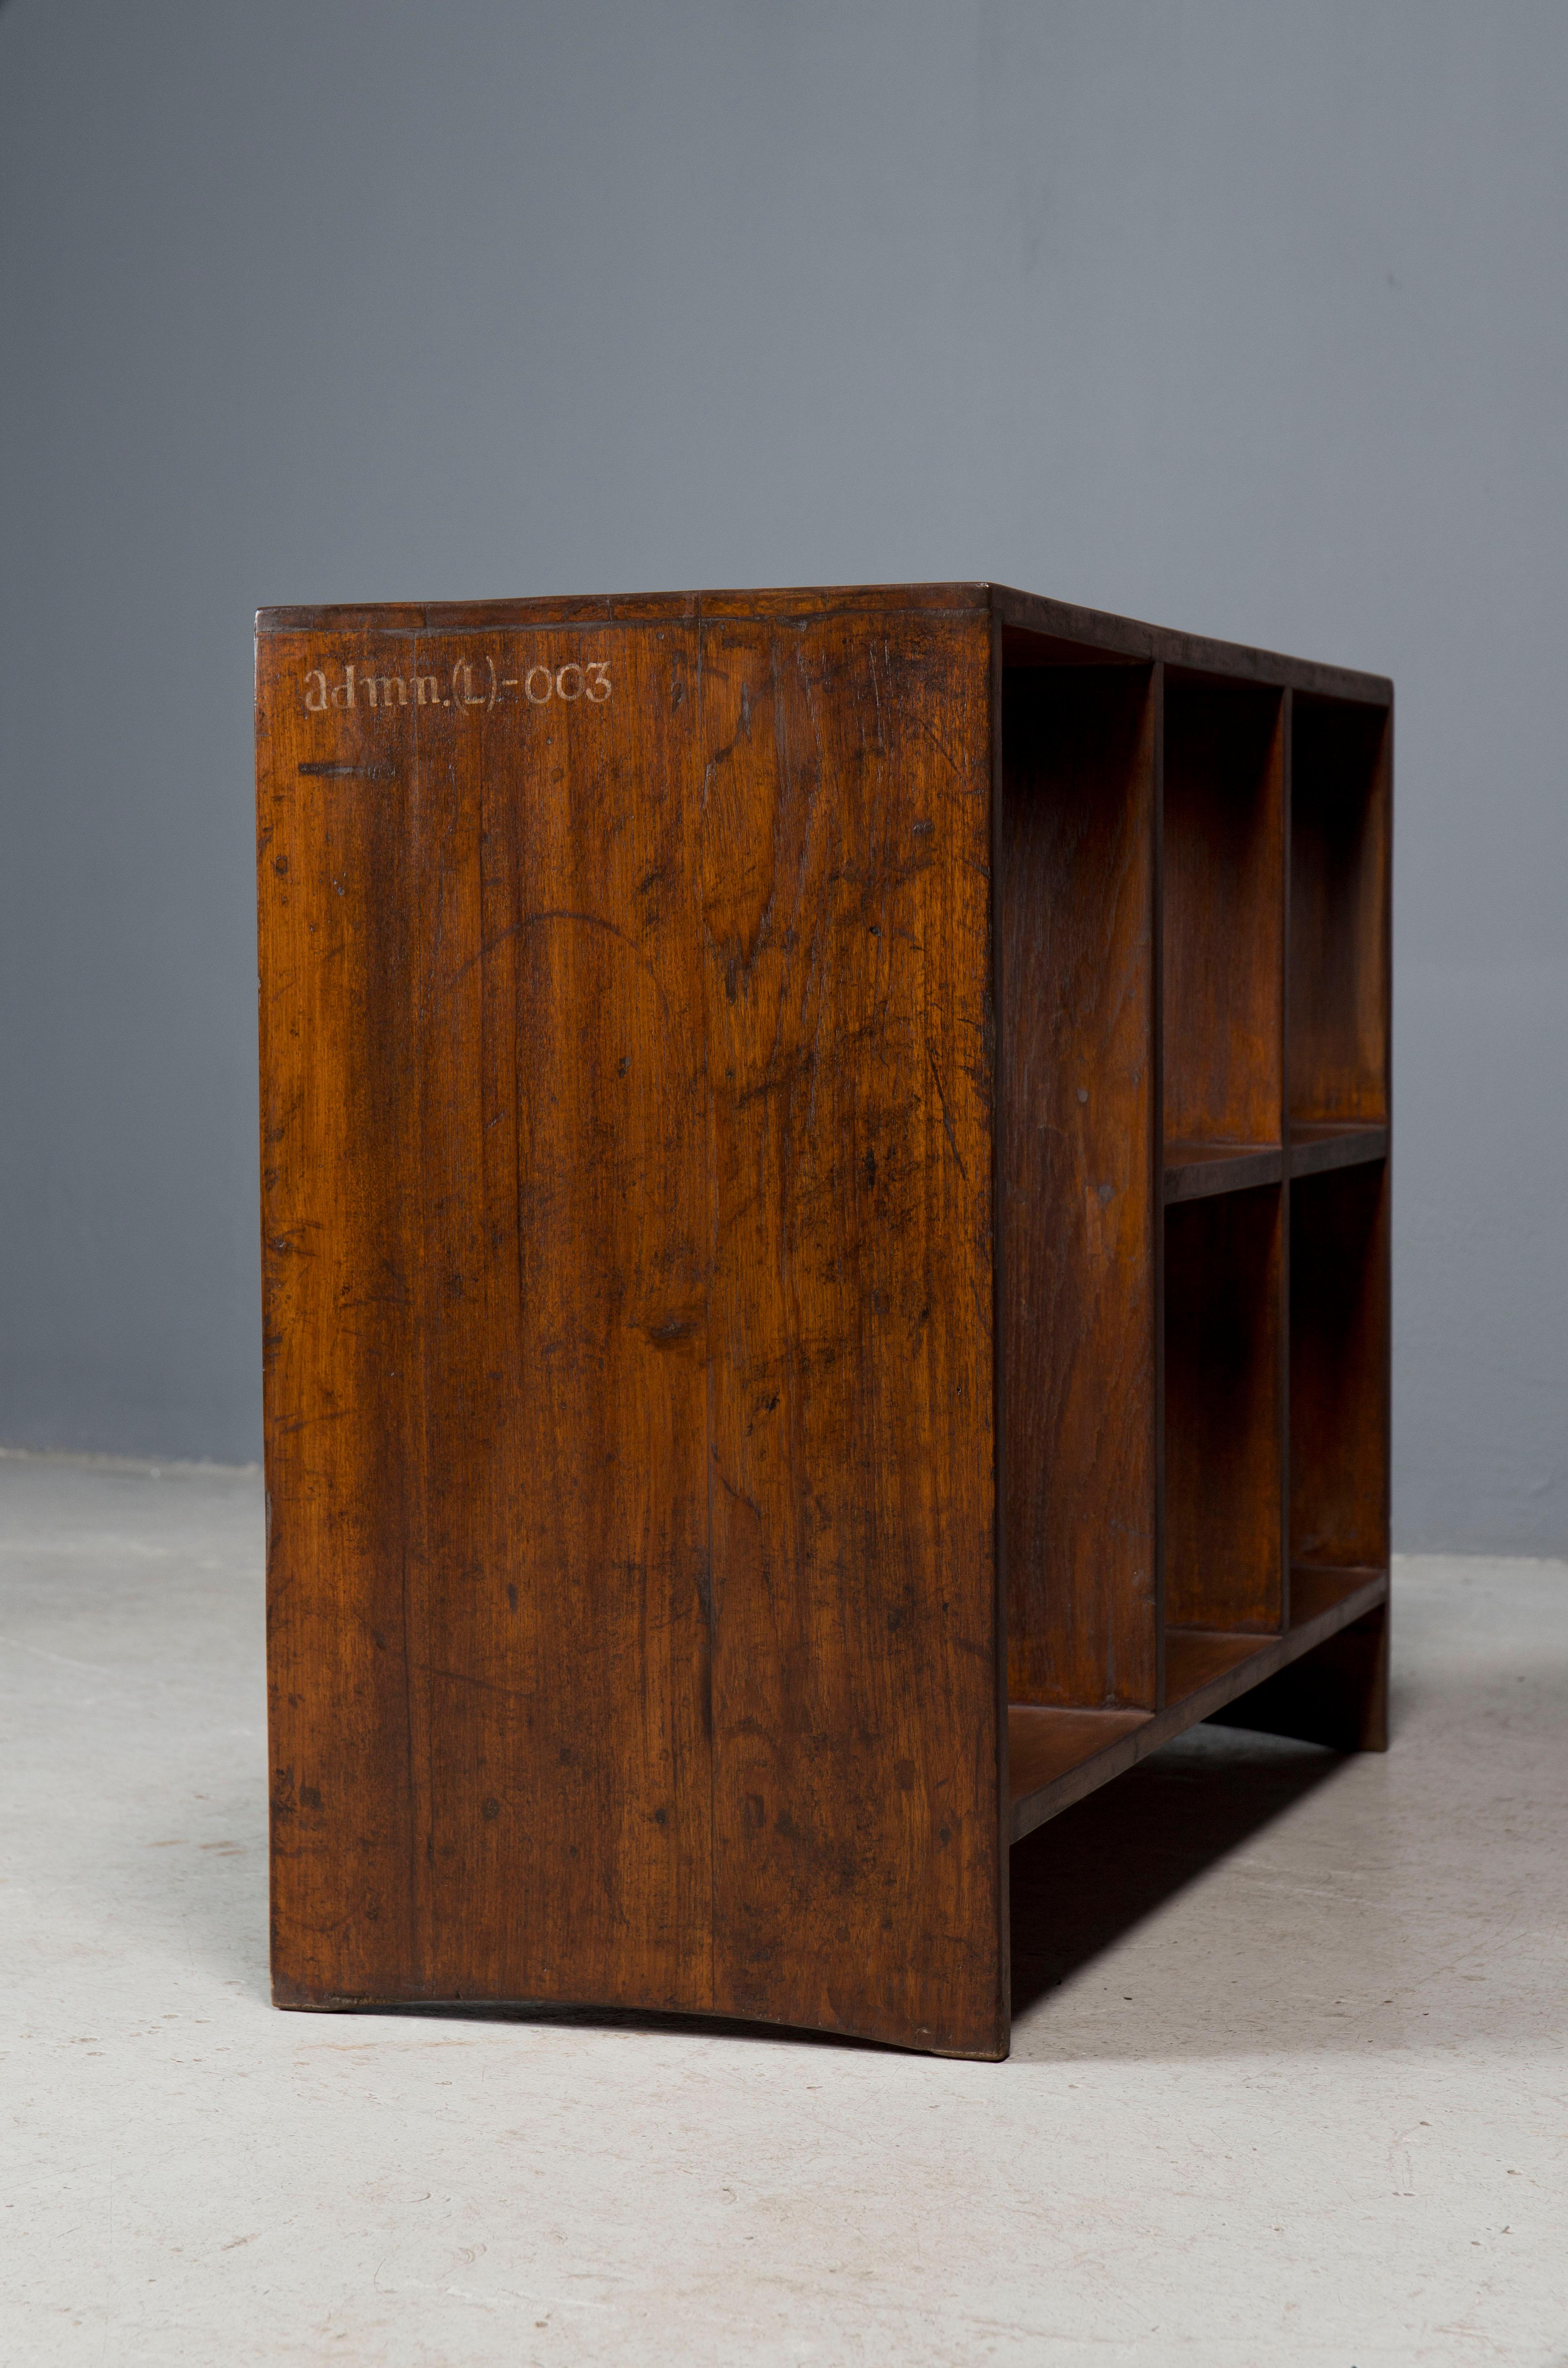 Rare pair of Pierre Jeanneret five hole file racks c 1950 with exceptional patina and markings. 

Designed and from Chandigarh administrative buildings.